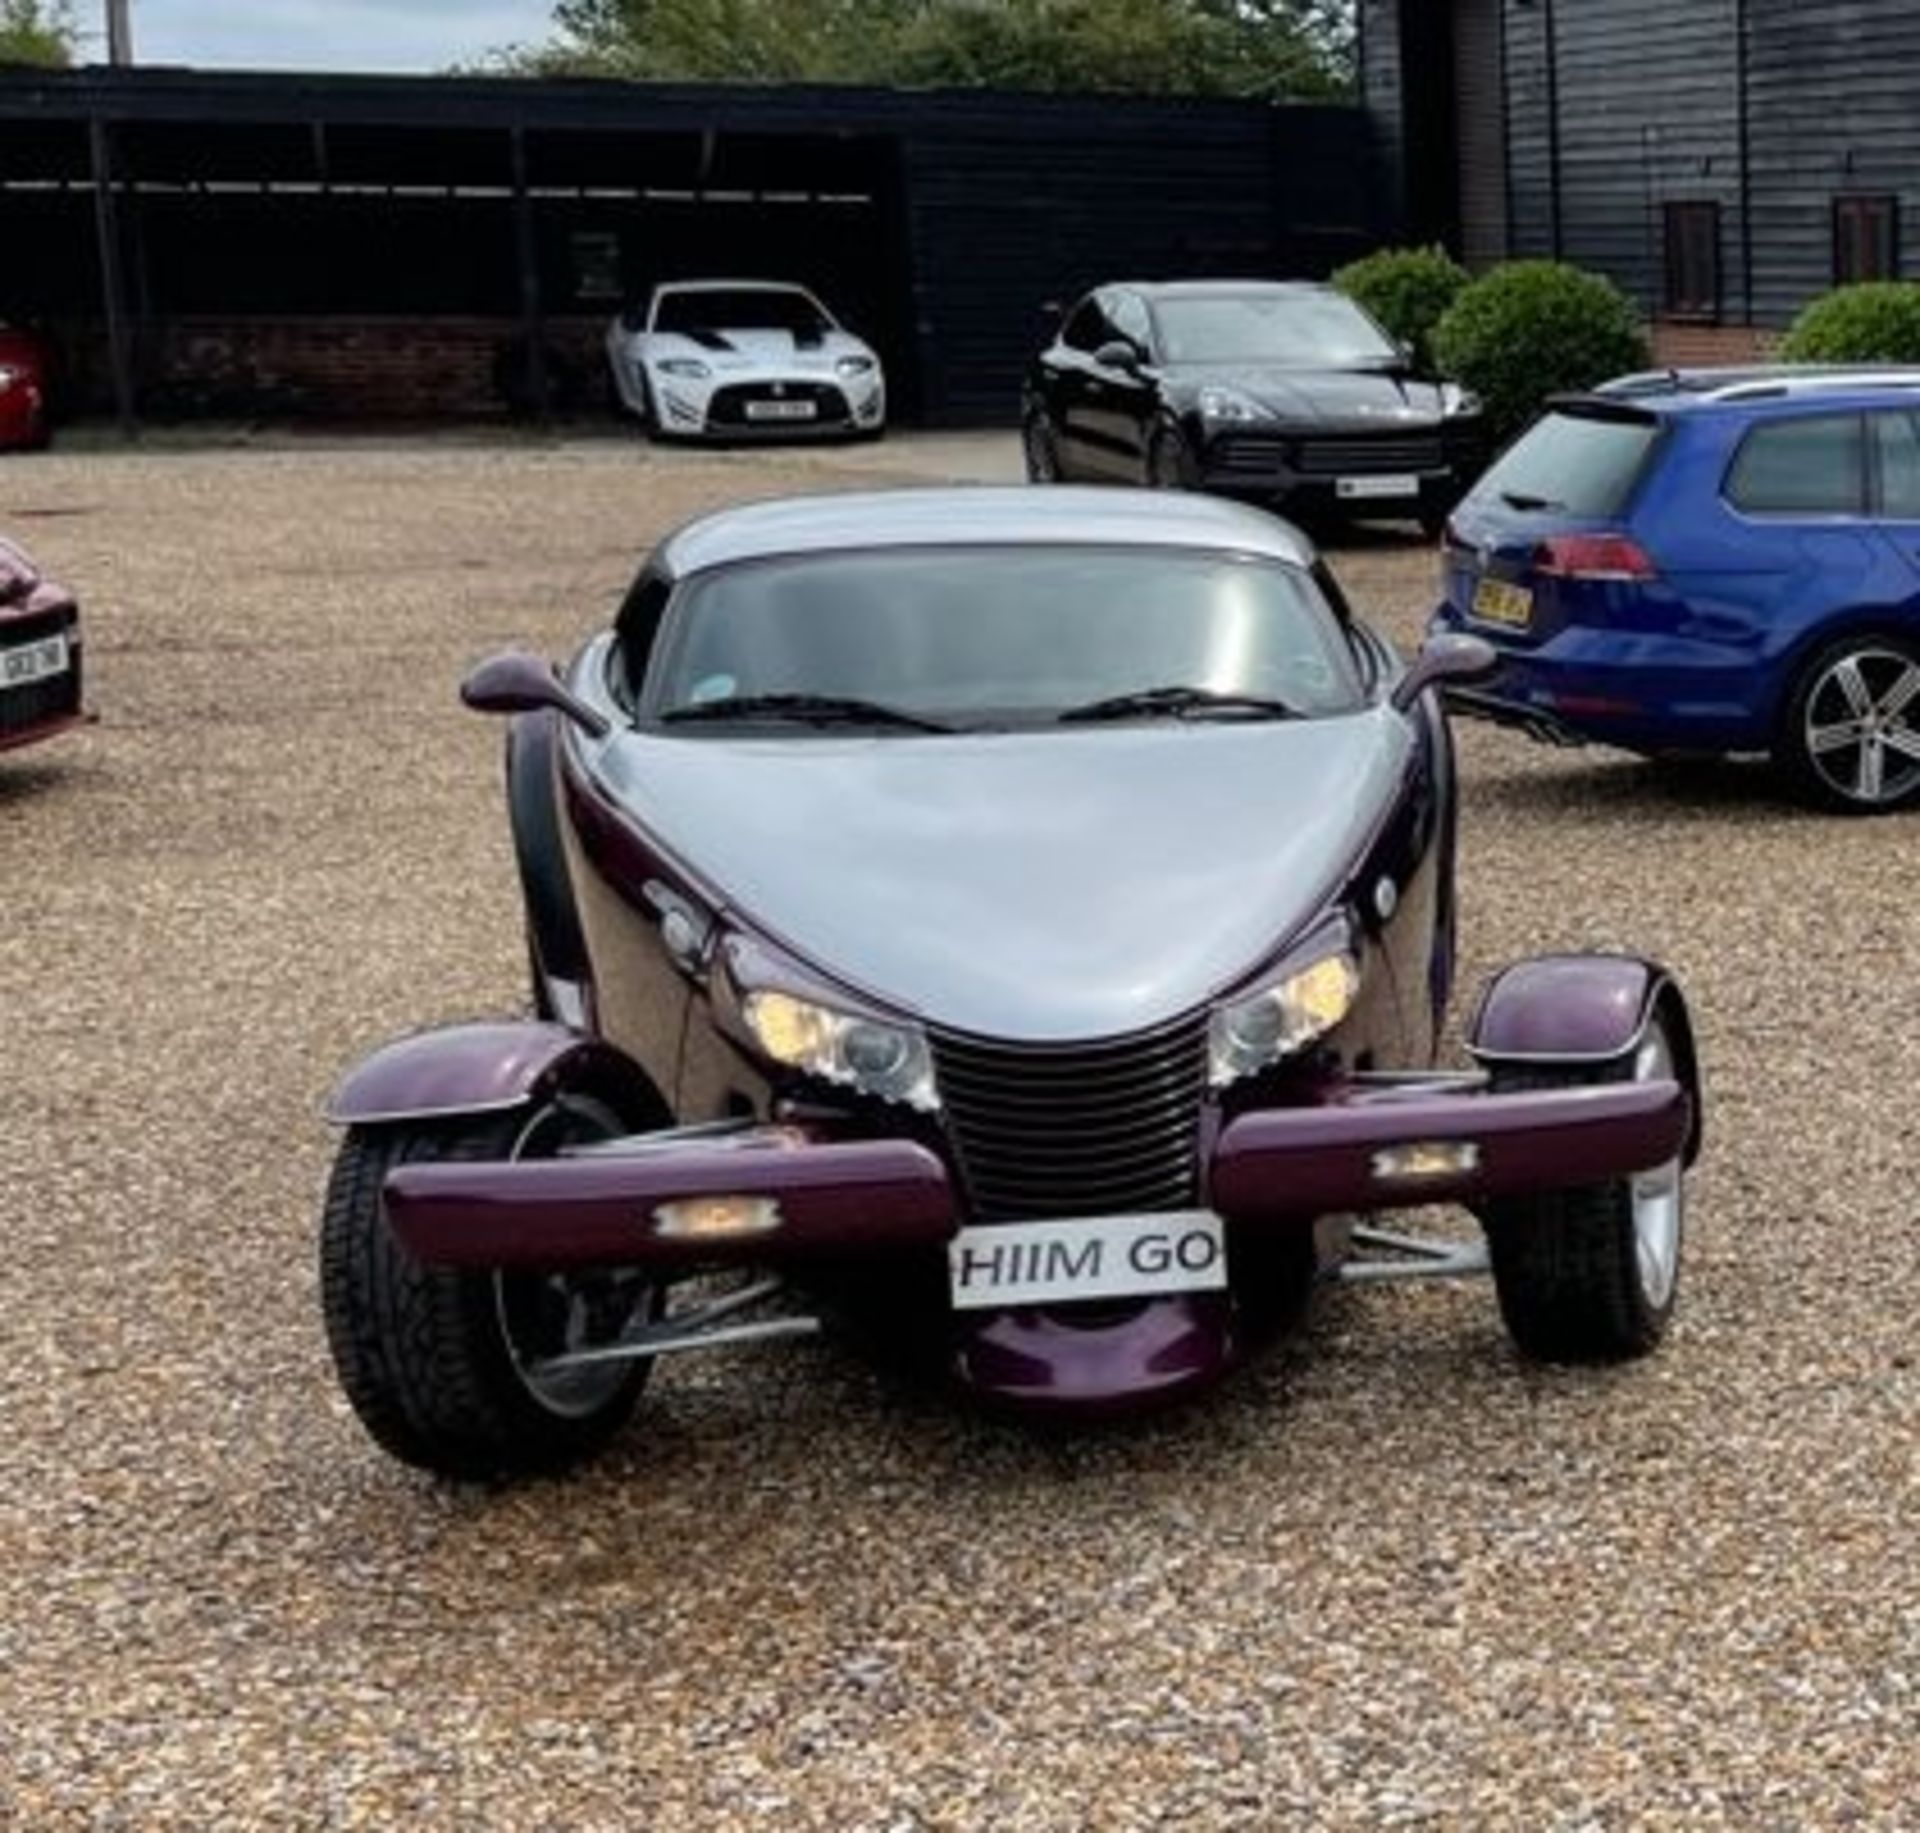 1998 CHRYSLER PLYMOUTH PROWLER V6 2 DOOR CONVERTIBLE, 3500cc PETROL ENGINE, AUTO *NO VAT* - Image 17 of 32